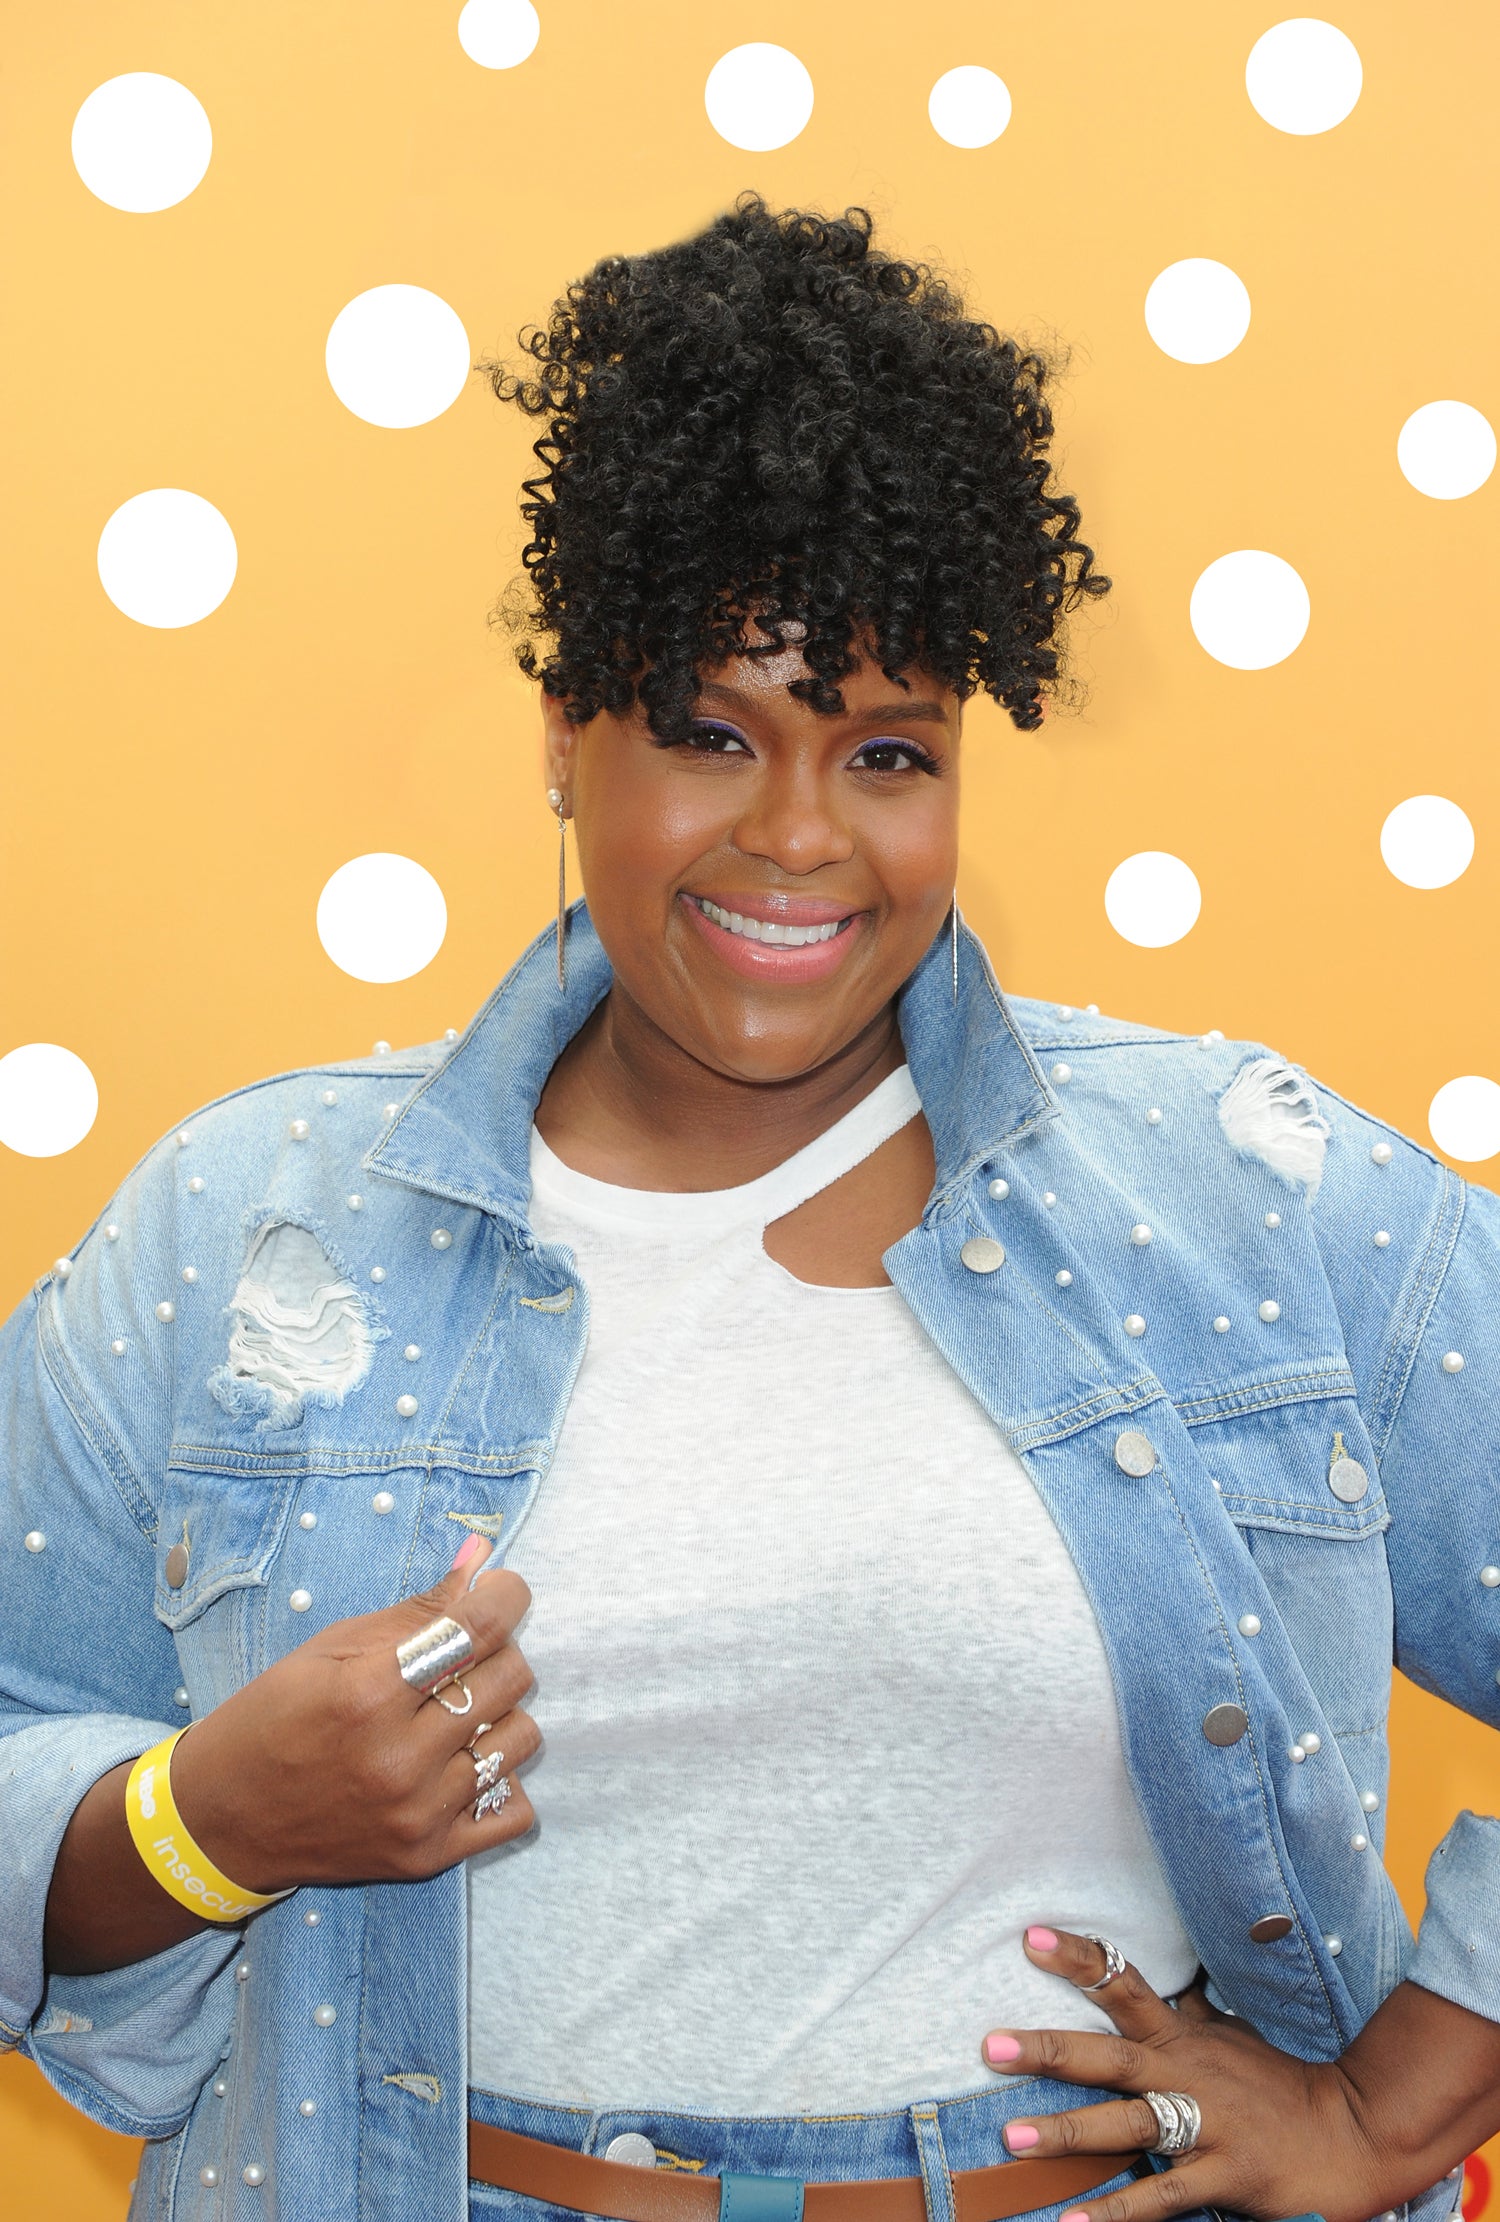 'Insecure' Breakout Star Natasha Rothwell Says Kelli Is 'Not The Cliché Portrayal Of A Plus Size Friend'